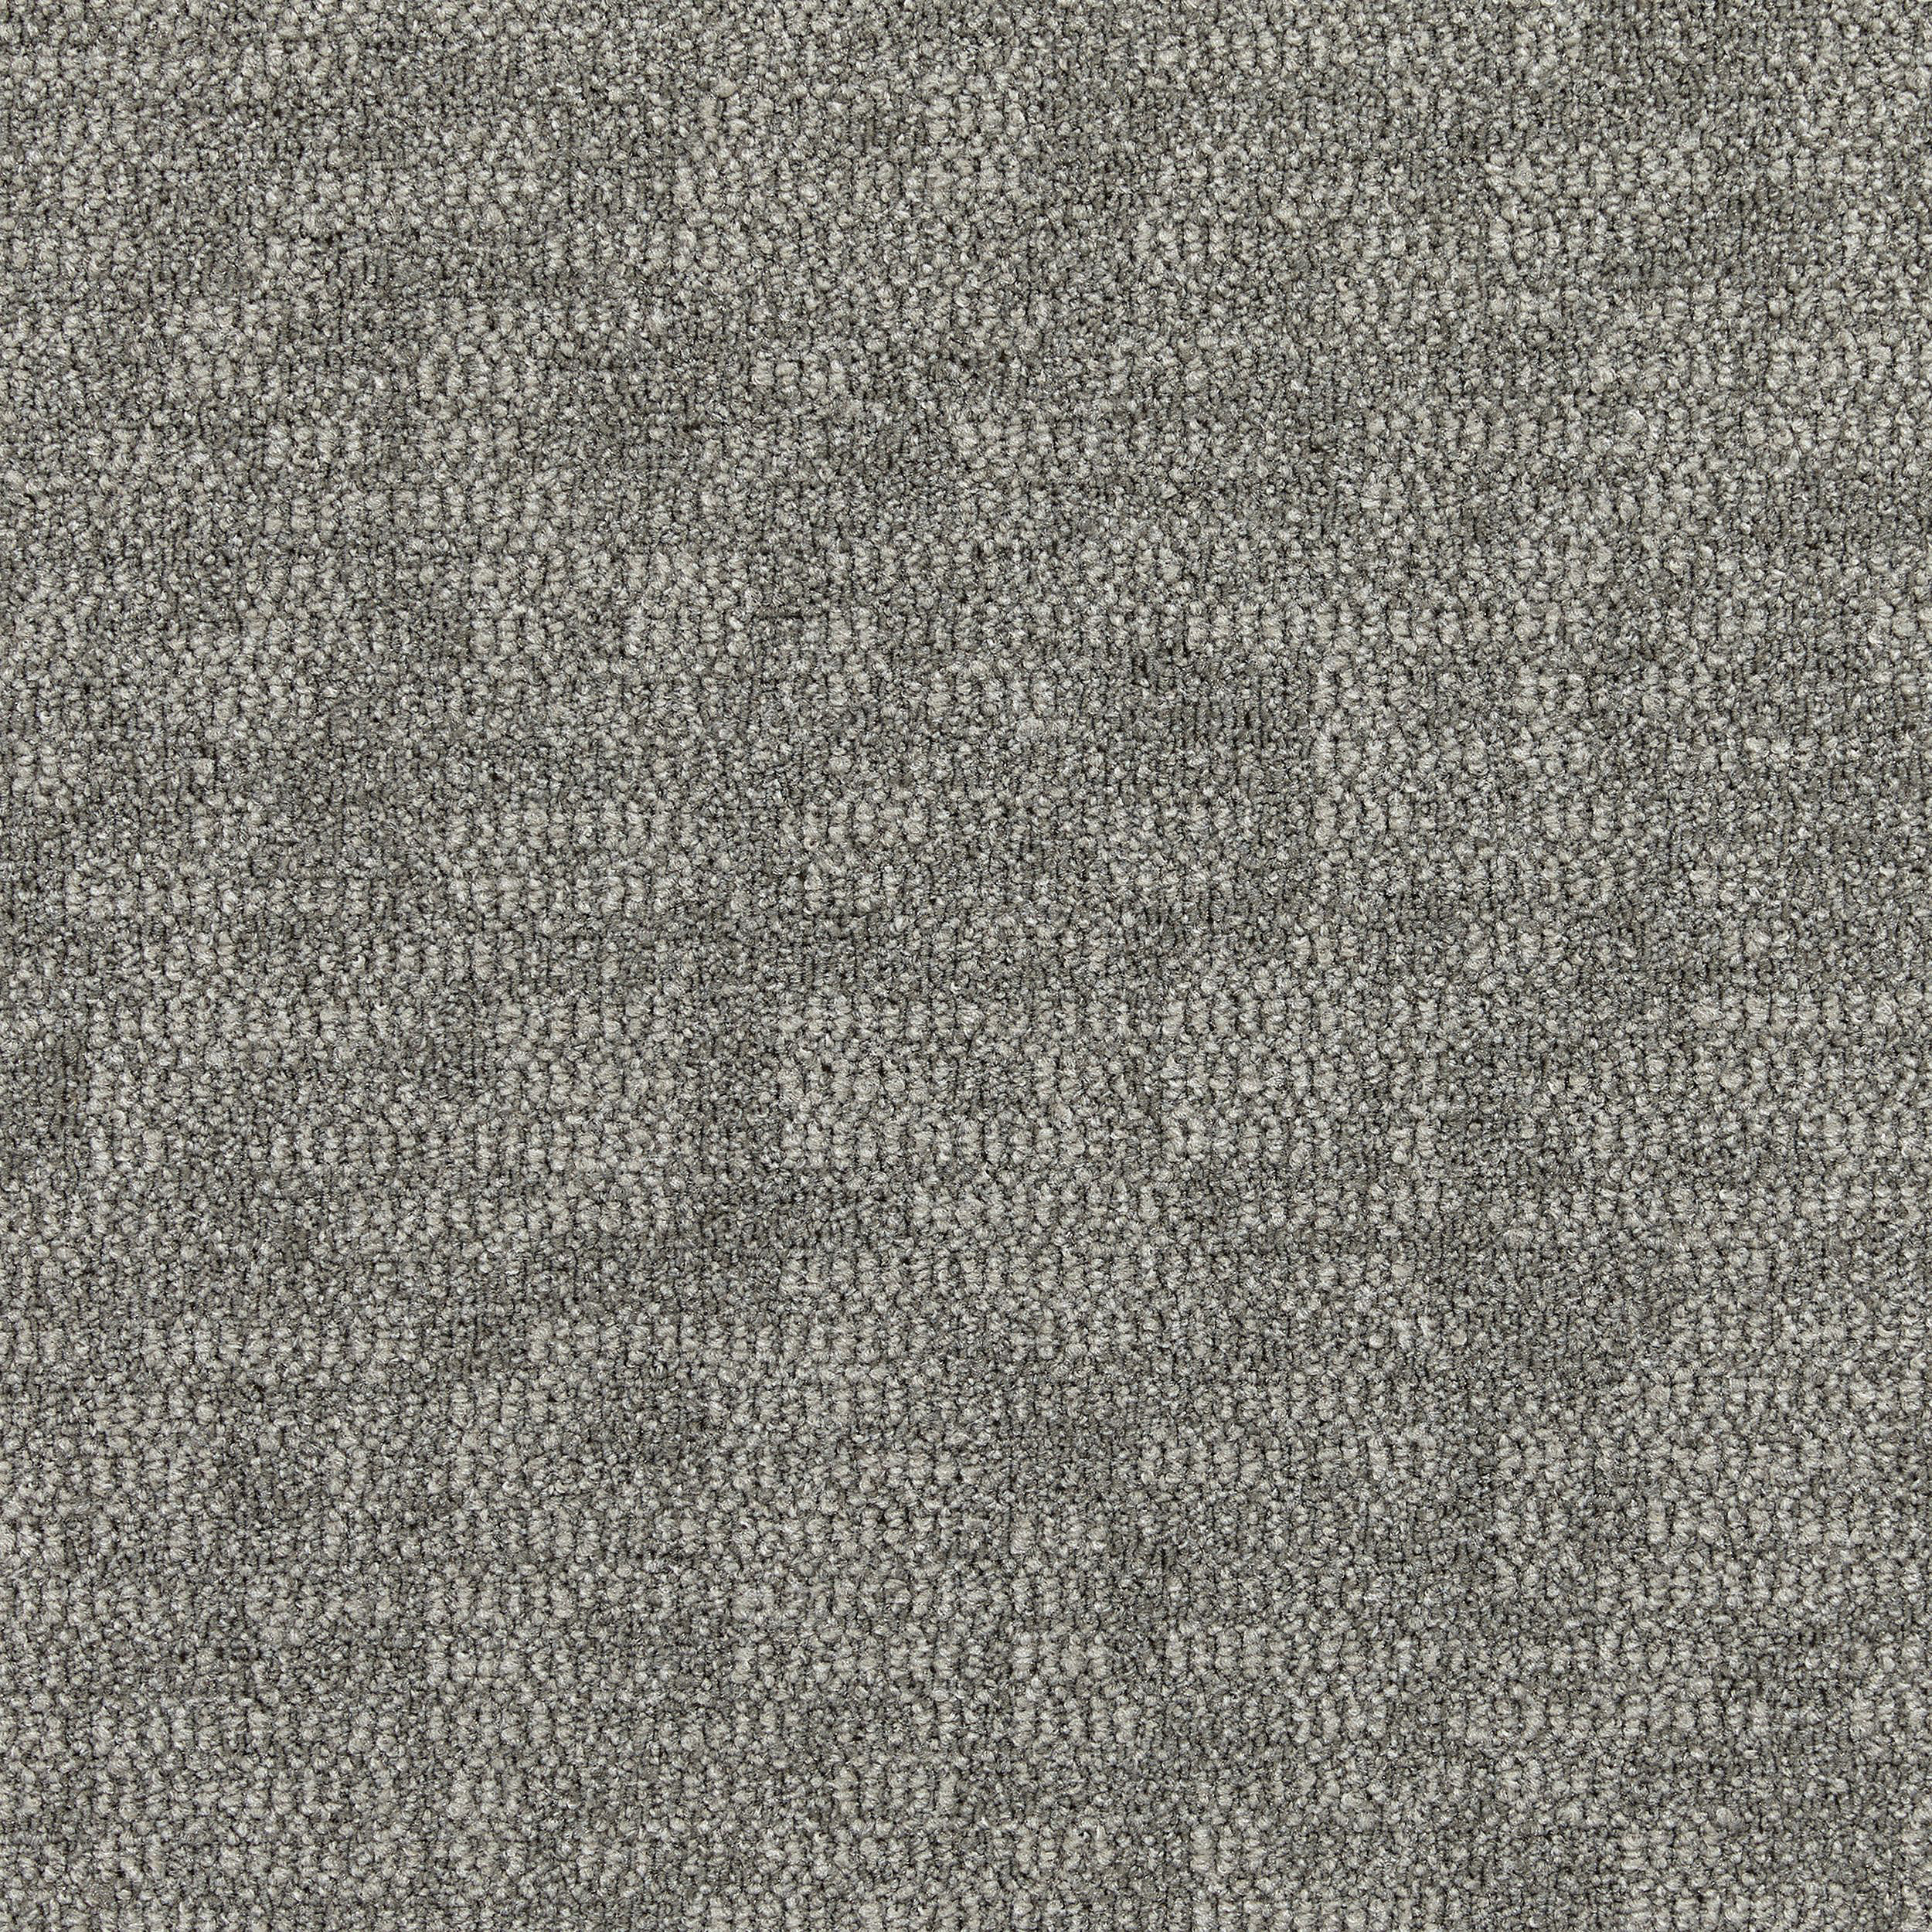 Yuton 106 Carpet Tile In Dove image number 3